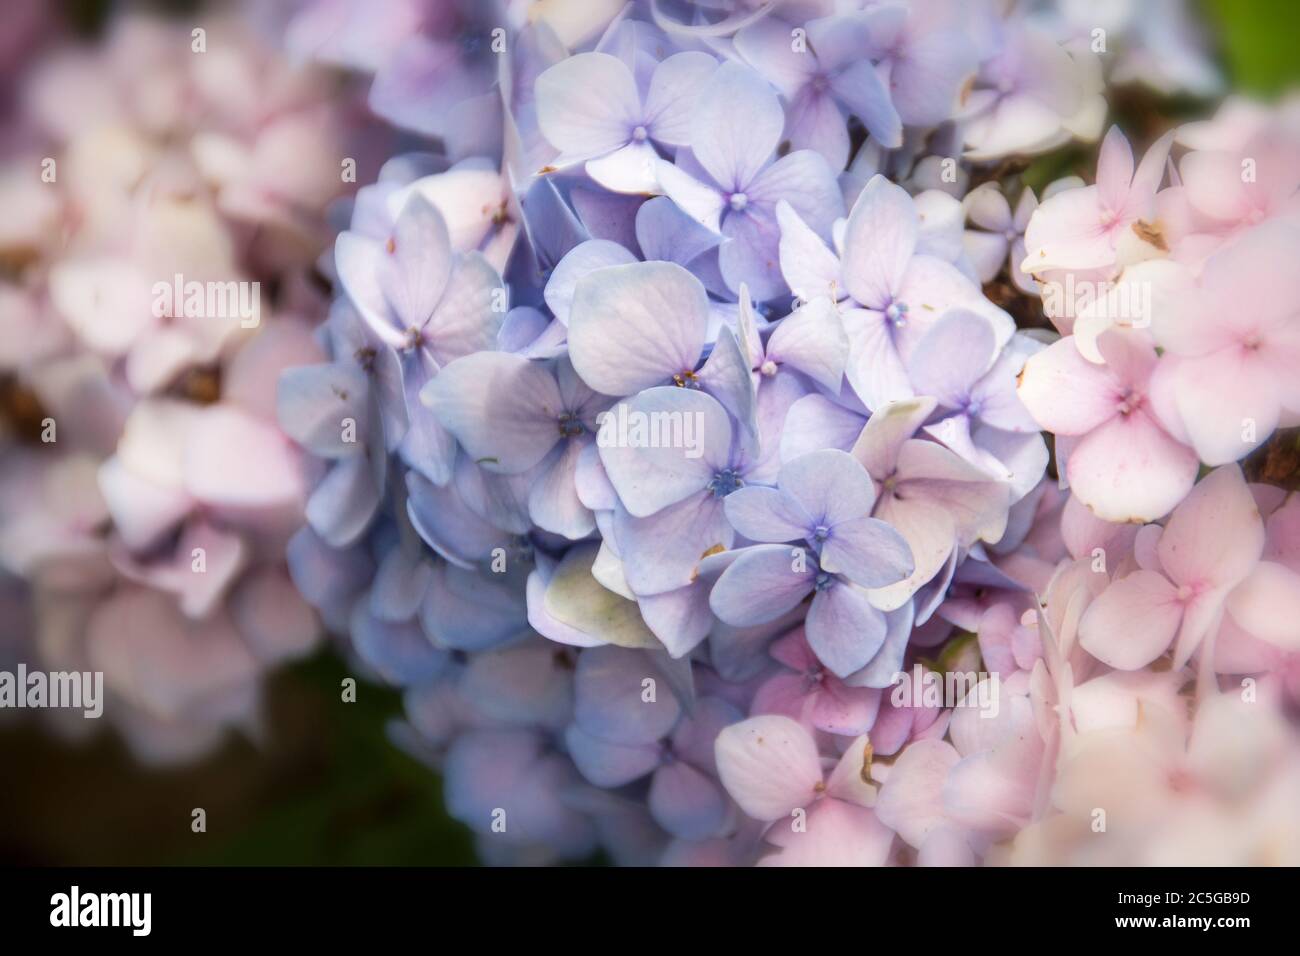 A grouping of blue and pink flowers growing together in a tight cluster. Stock Photo